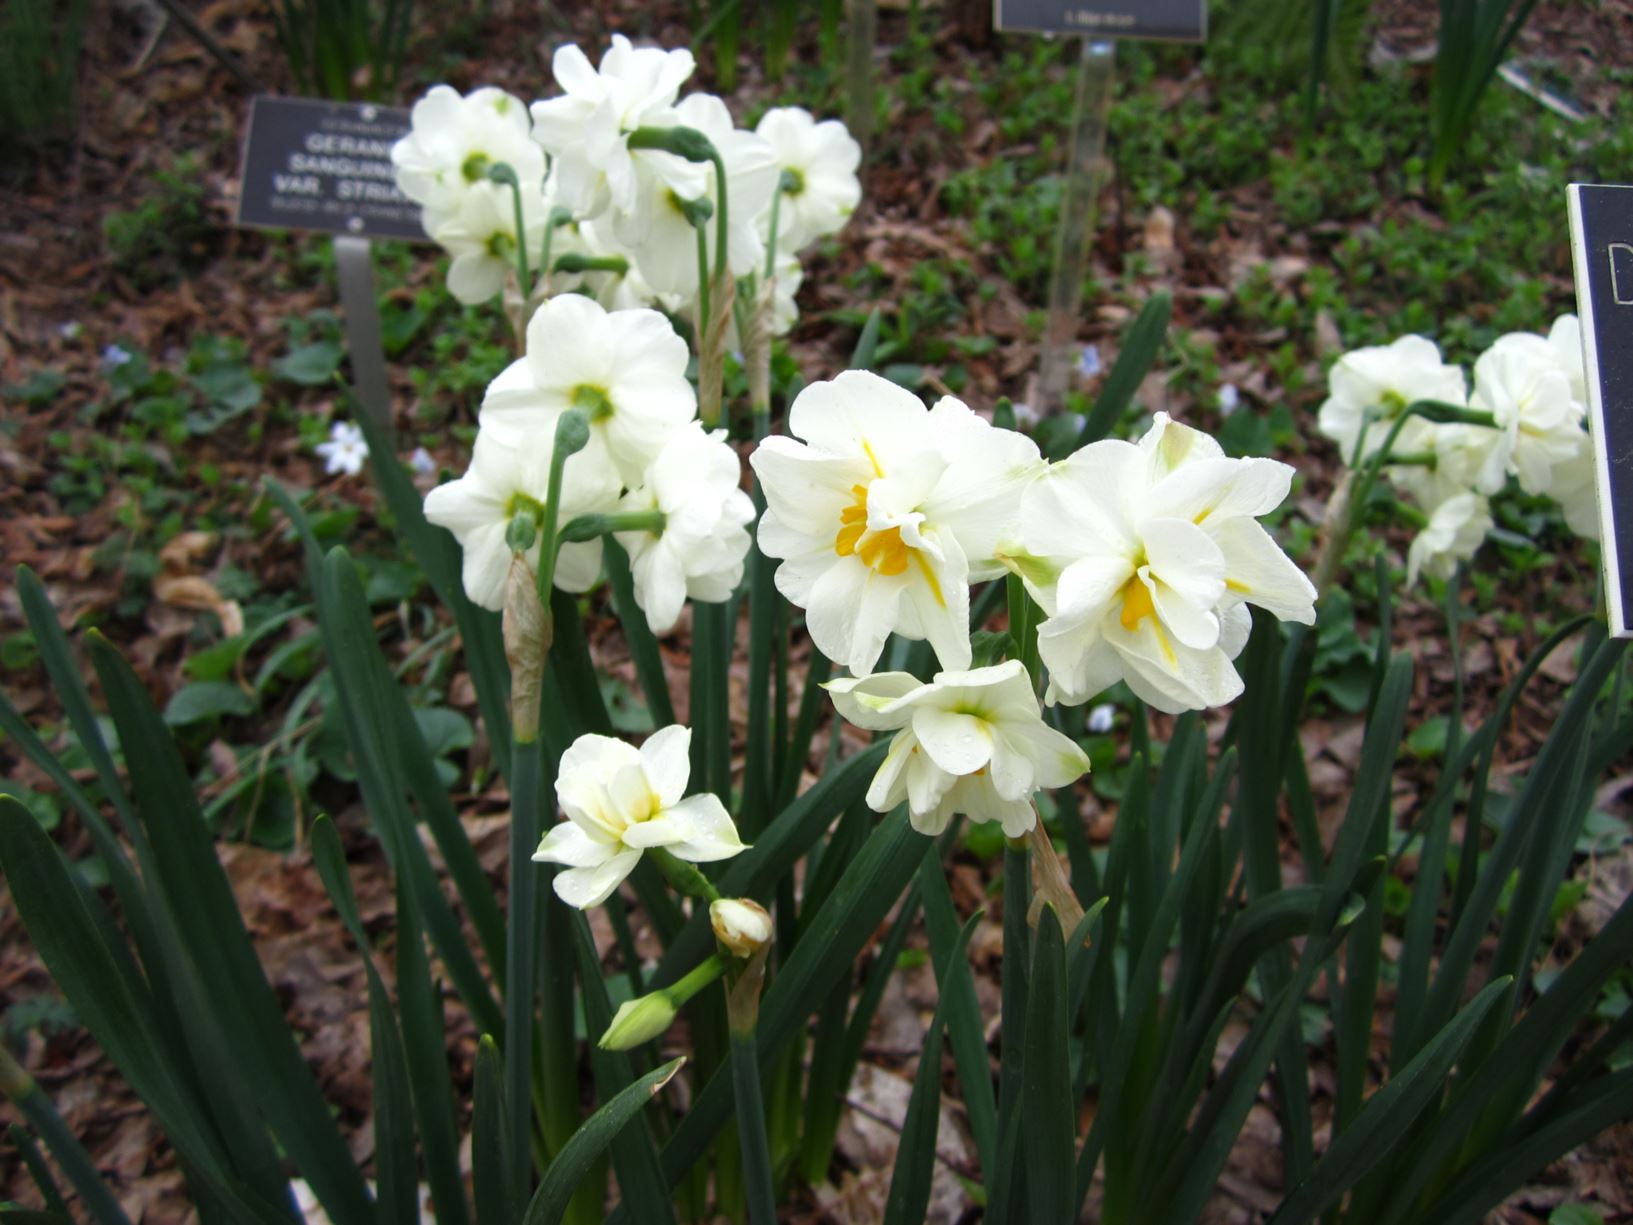 Narcissus 'Bridal Crown' - double daffodil